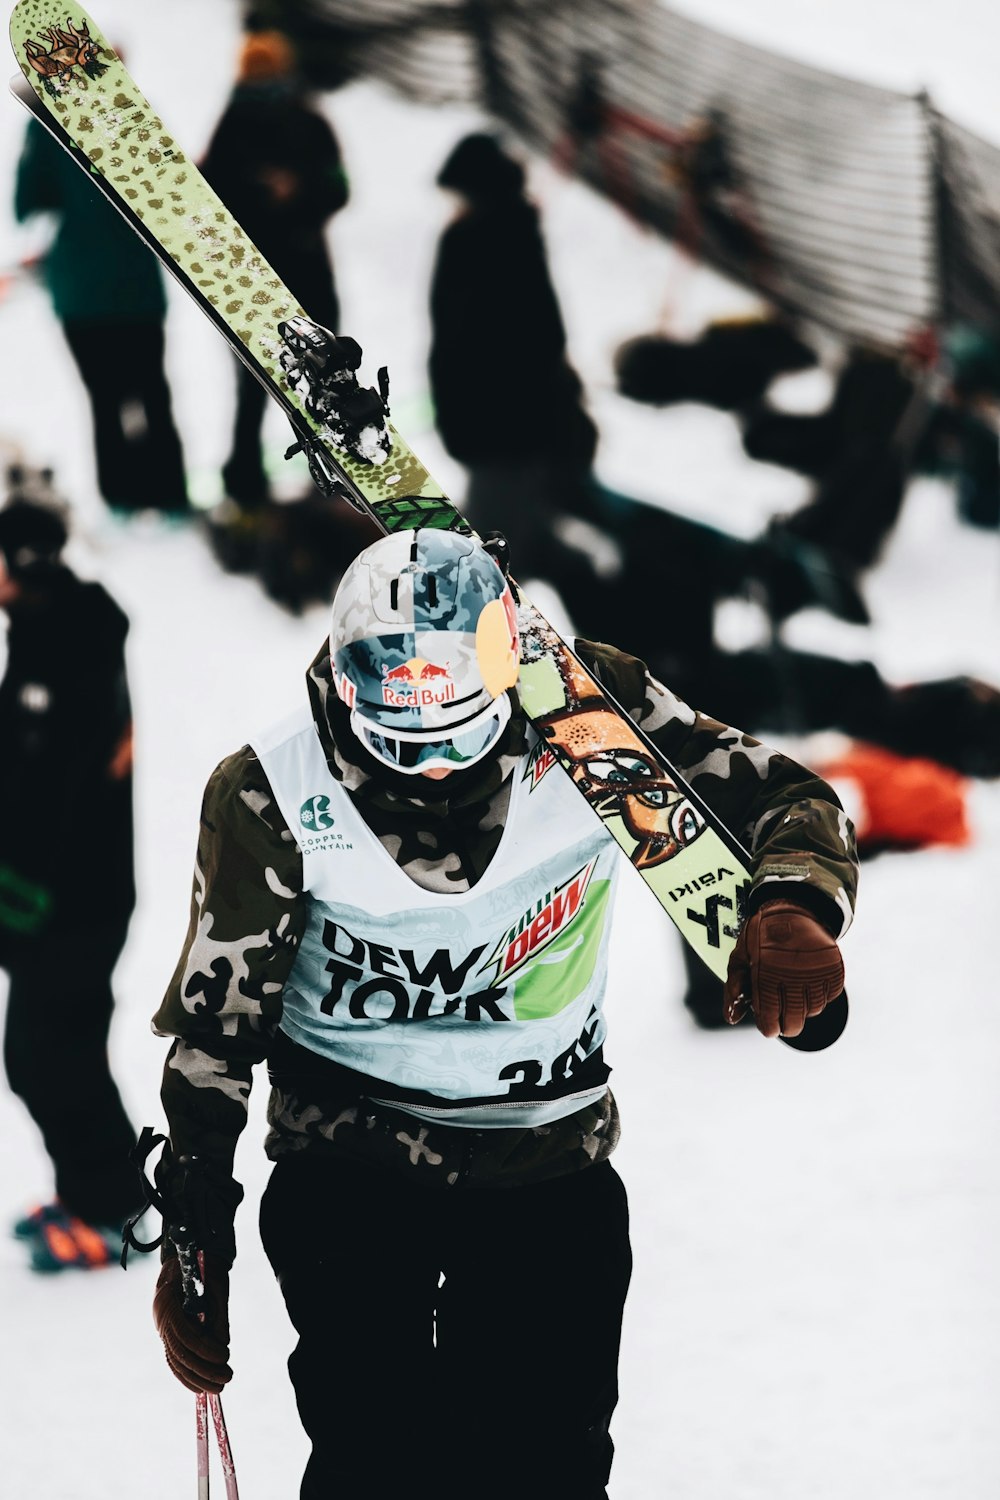 person in white and green jacket and black pants riding on ski blades